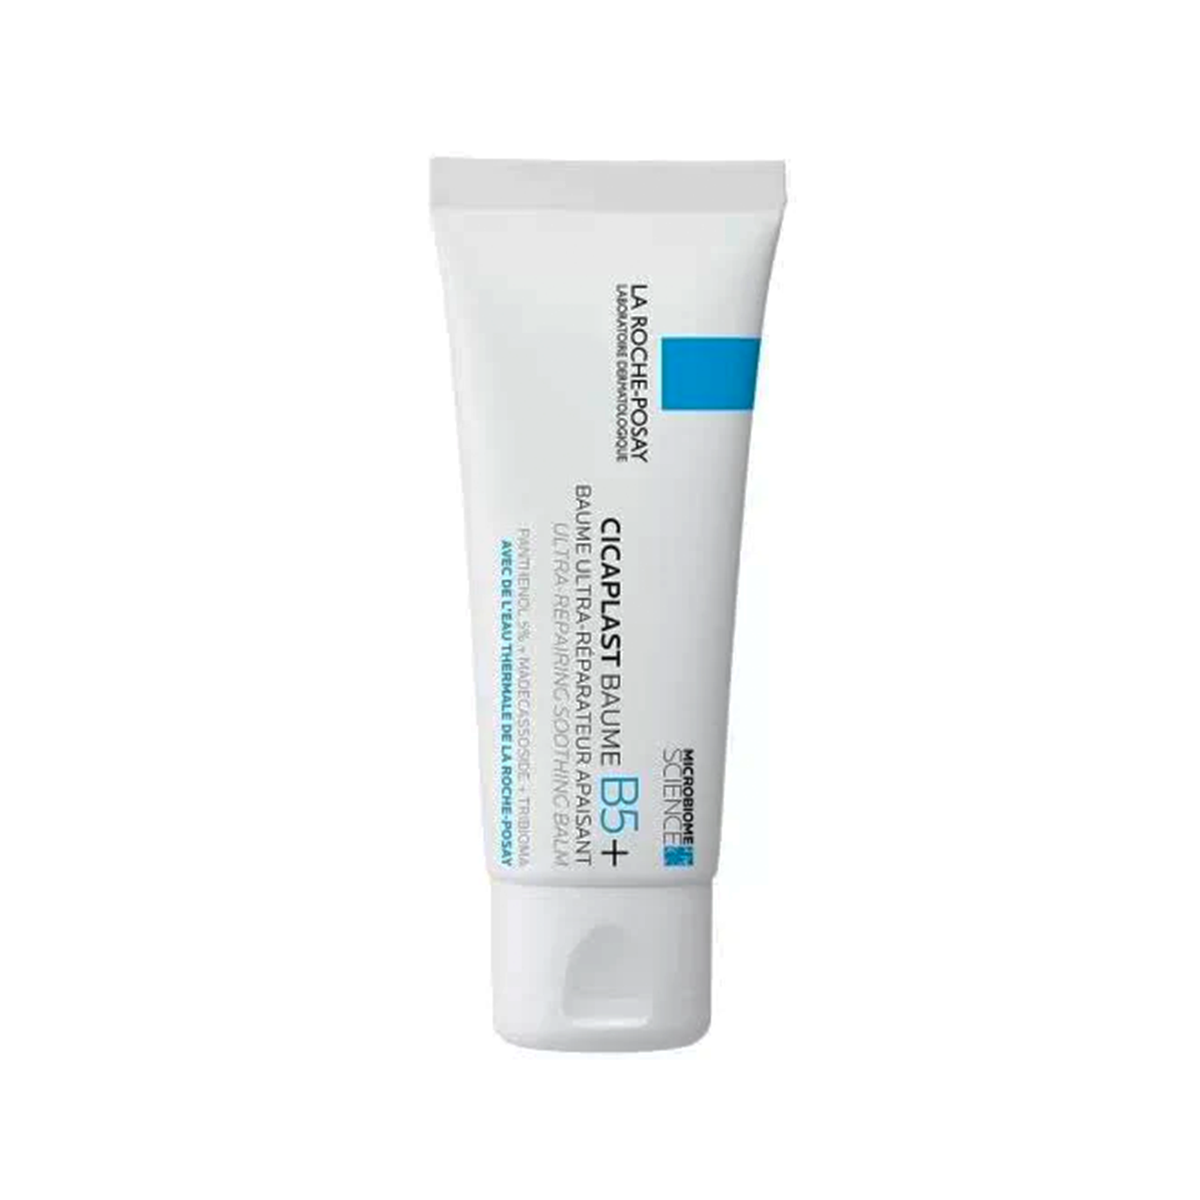 la-roche-posay-cicaplast-soothing-face-and-body-balm-b5-100ml